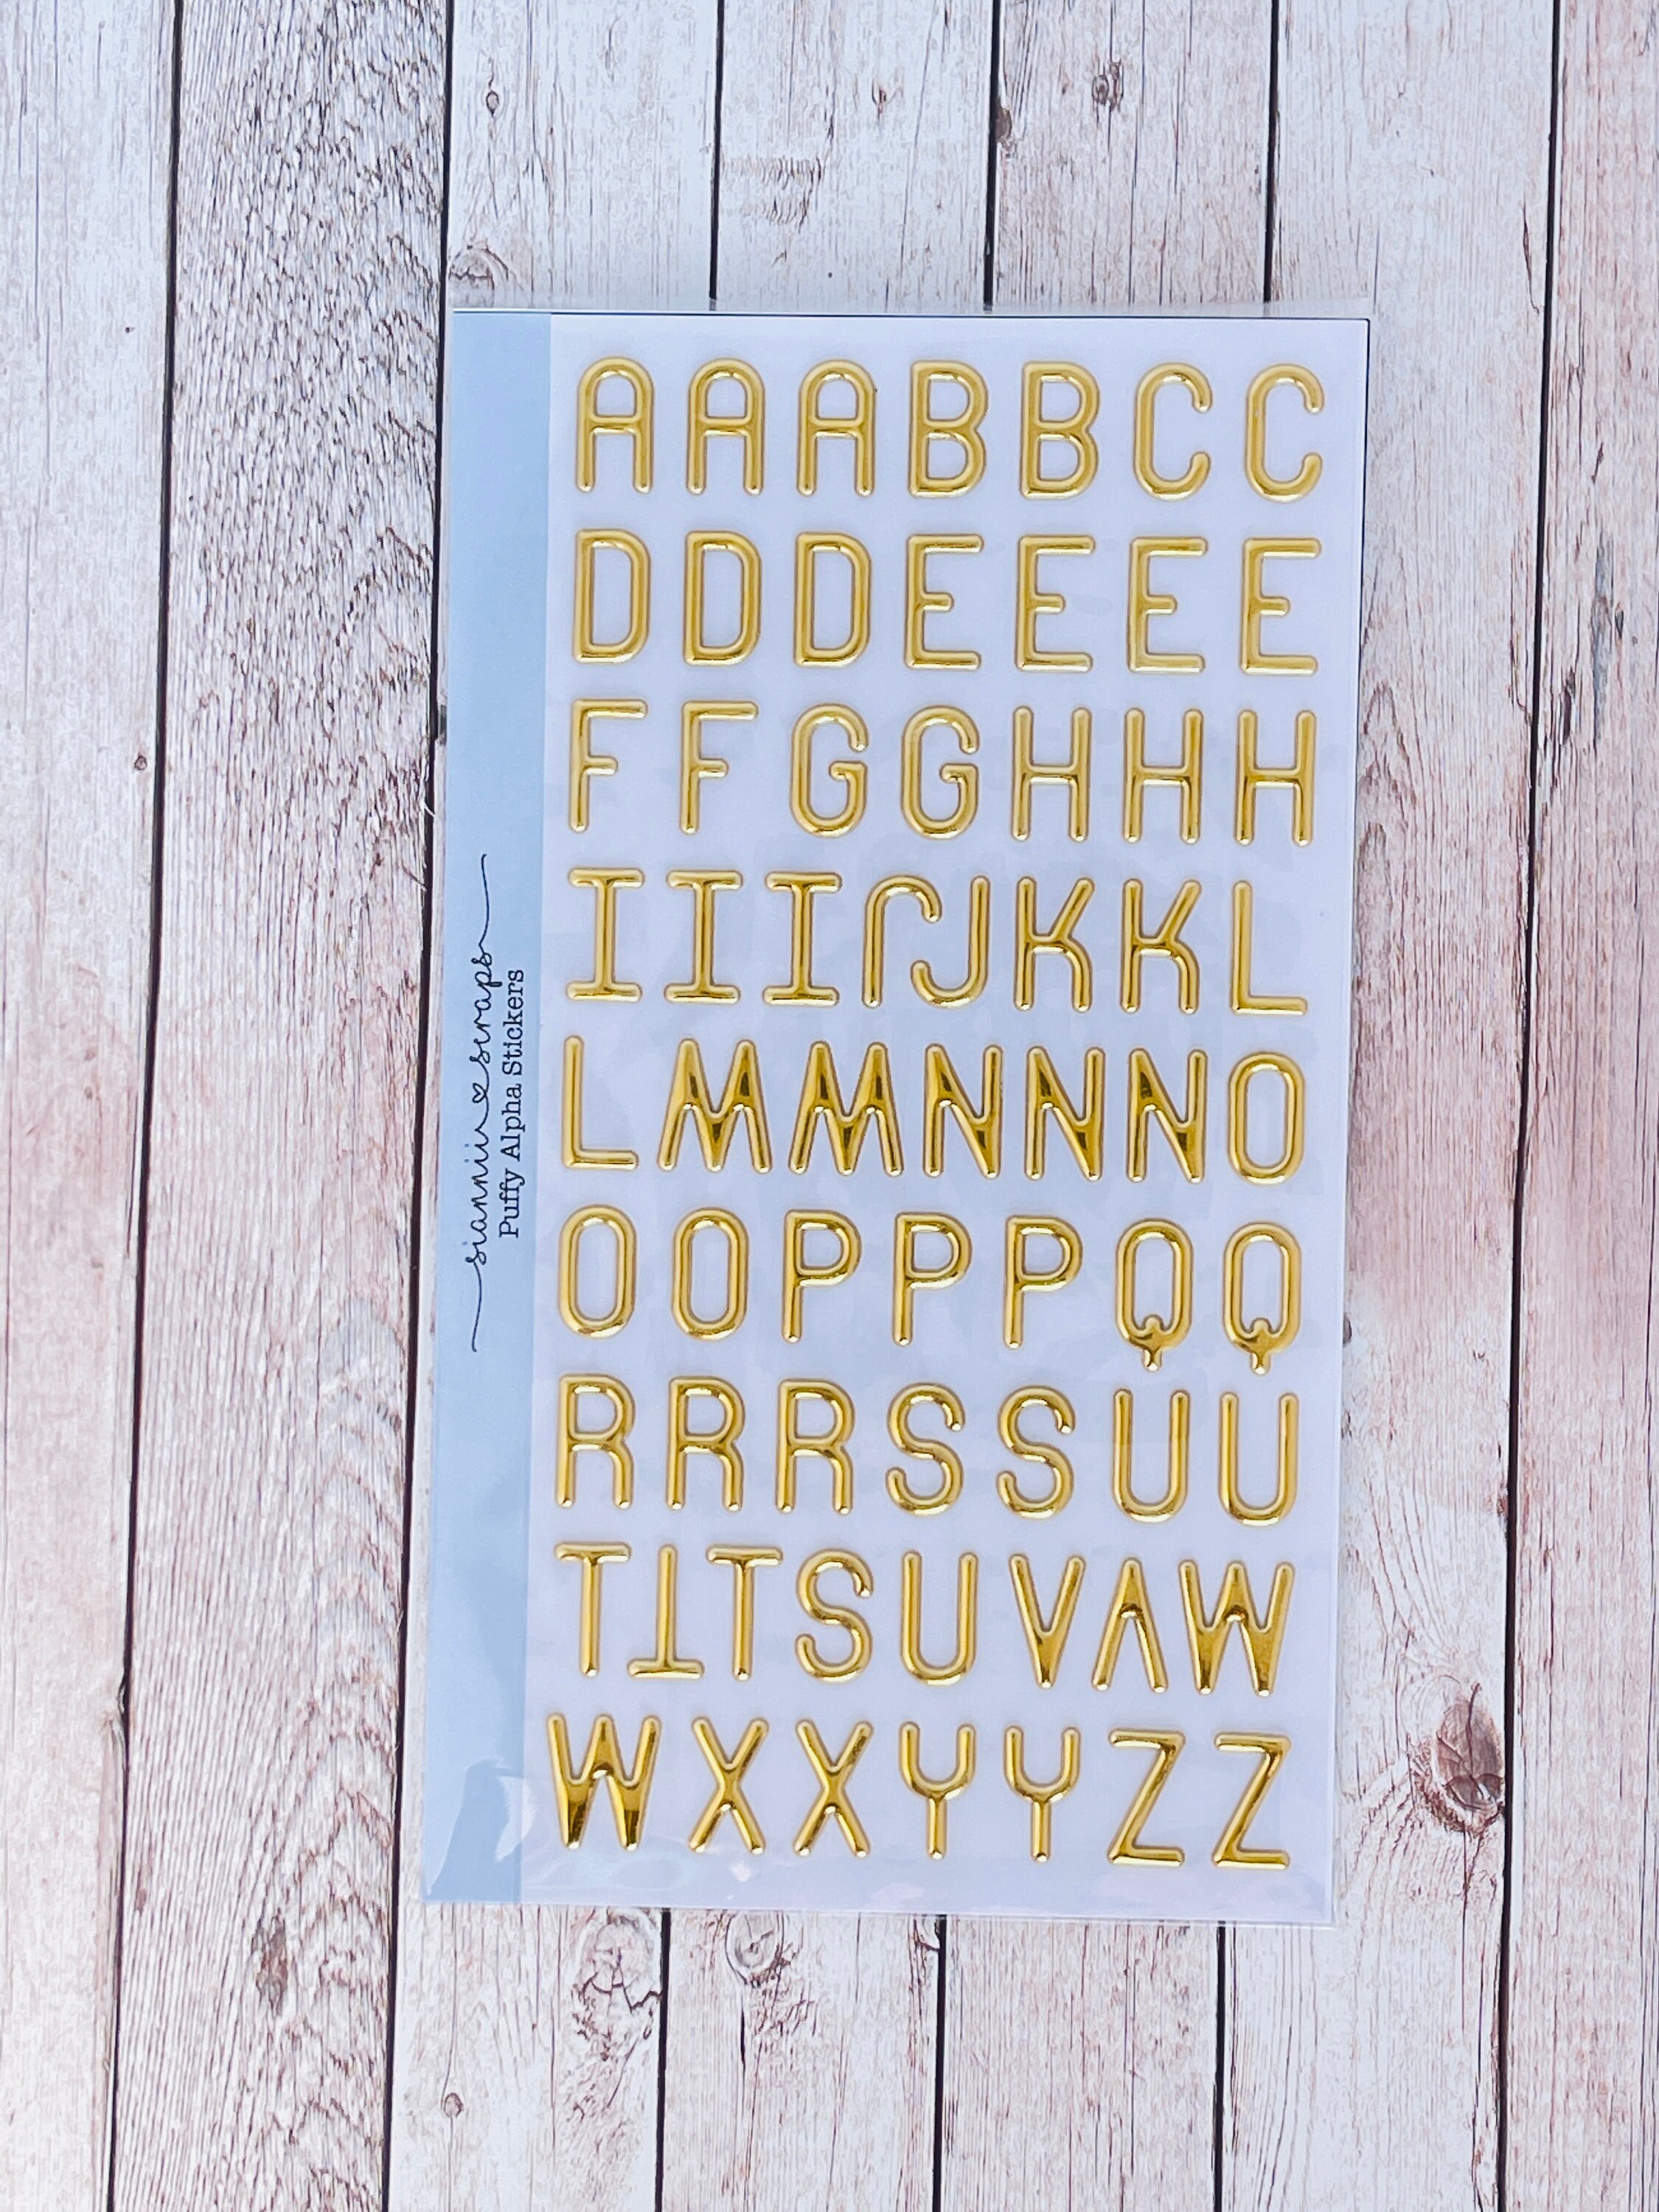 Matte Gold Large Puffy Alphabet Stickers